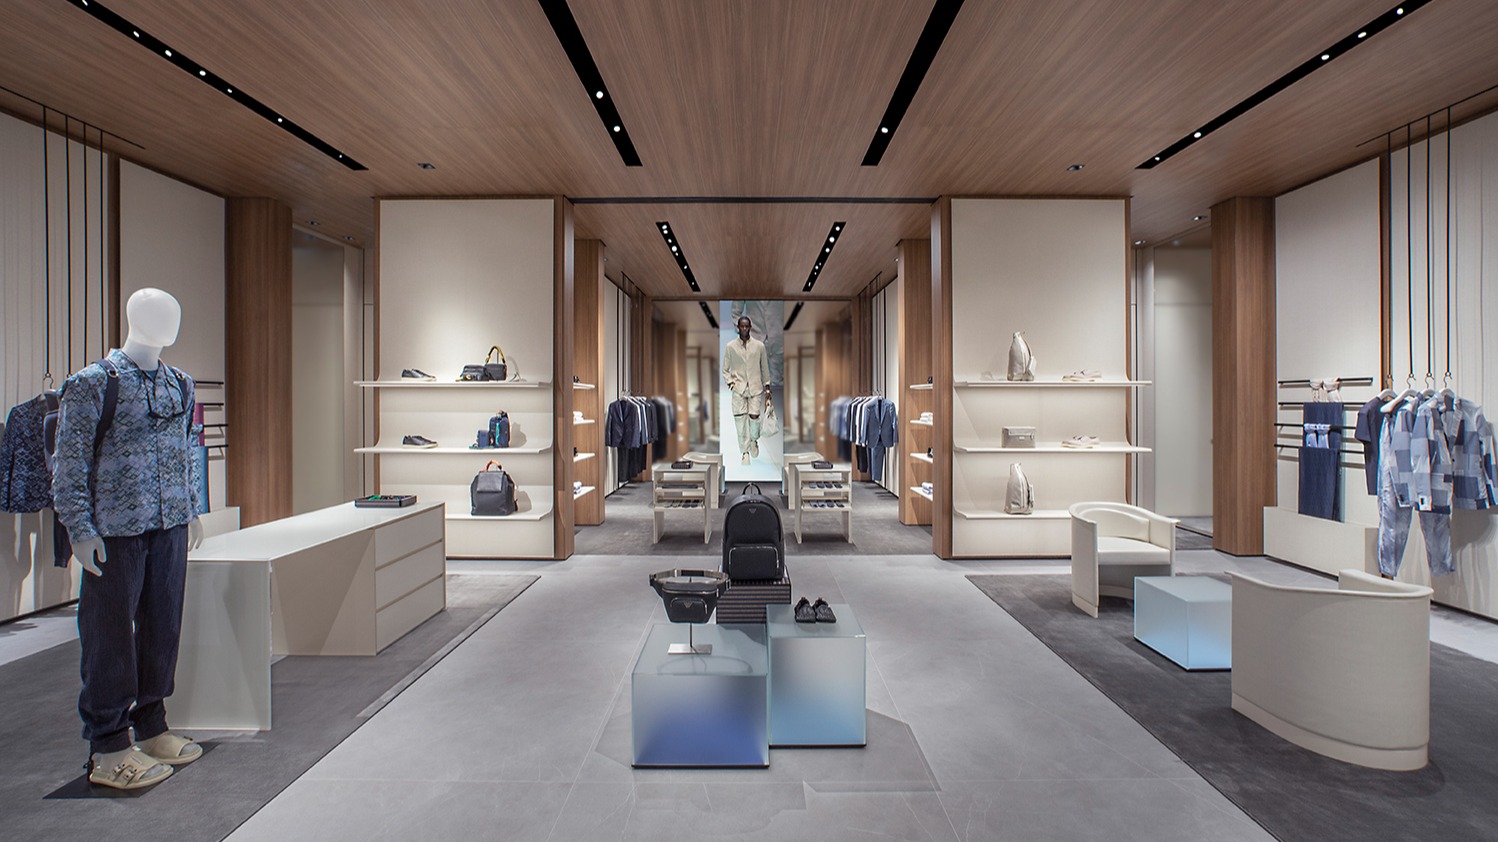 Emporio Armani Opens New Flagship Store in New York